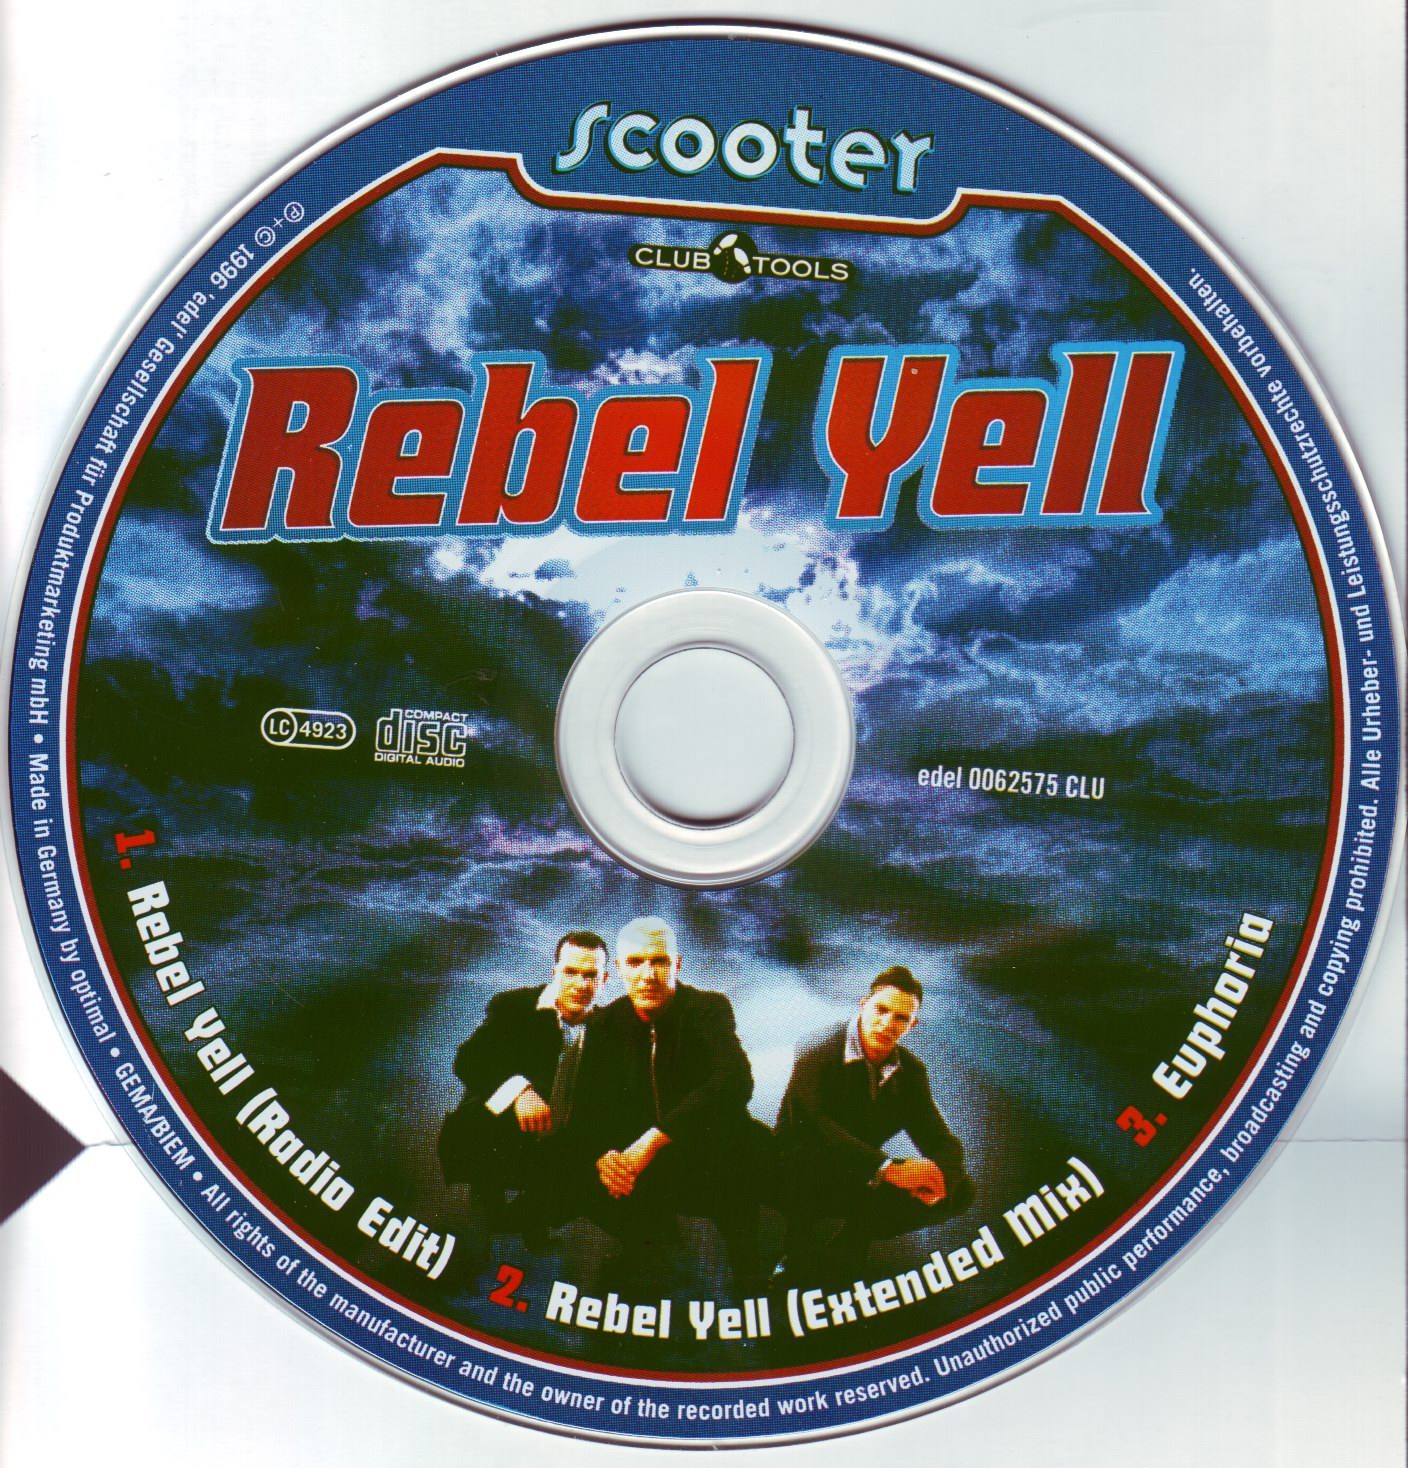 Scooter posse reloaded. Scooter Singles. Scooter Rebel Yell обложка. Scooter Singles CD. Rebel Rebel 1996.